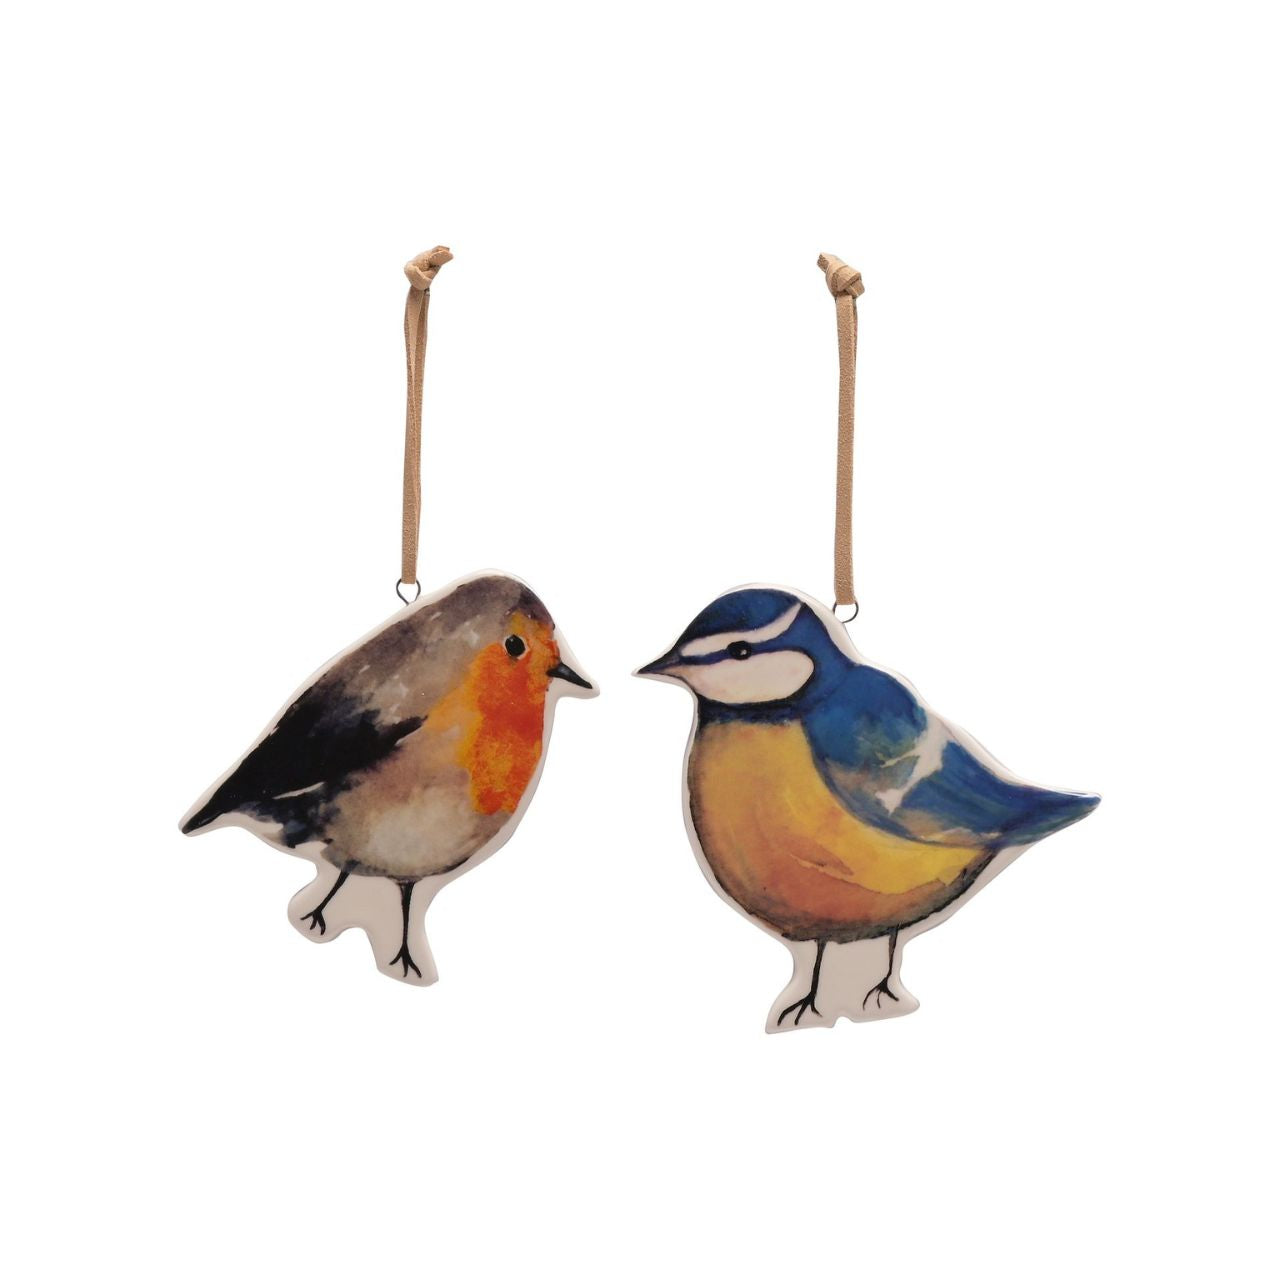 Country Living Set of 2 Bird Plaques - Robin & Blue Tit A set of 2 robin and blue tit bird plaques by COUNTRY LIVING®.  These gorgeous hanging plaques celebrate wildlife and the wonderful colours of nature.